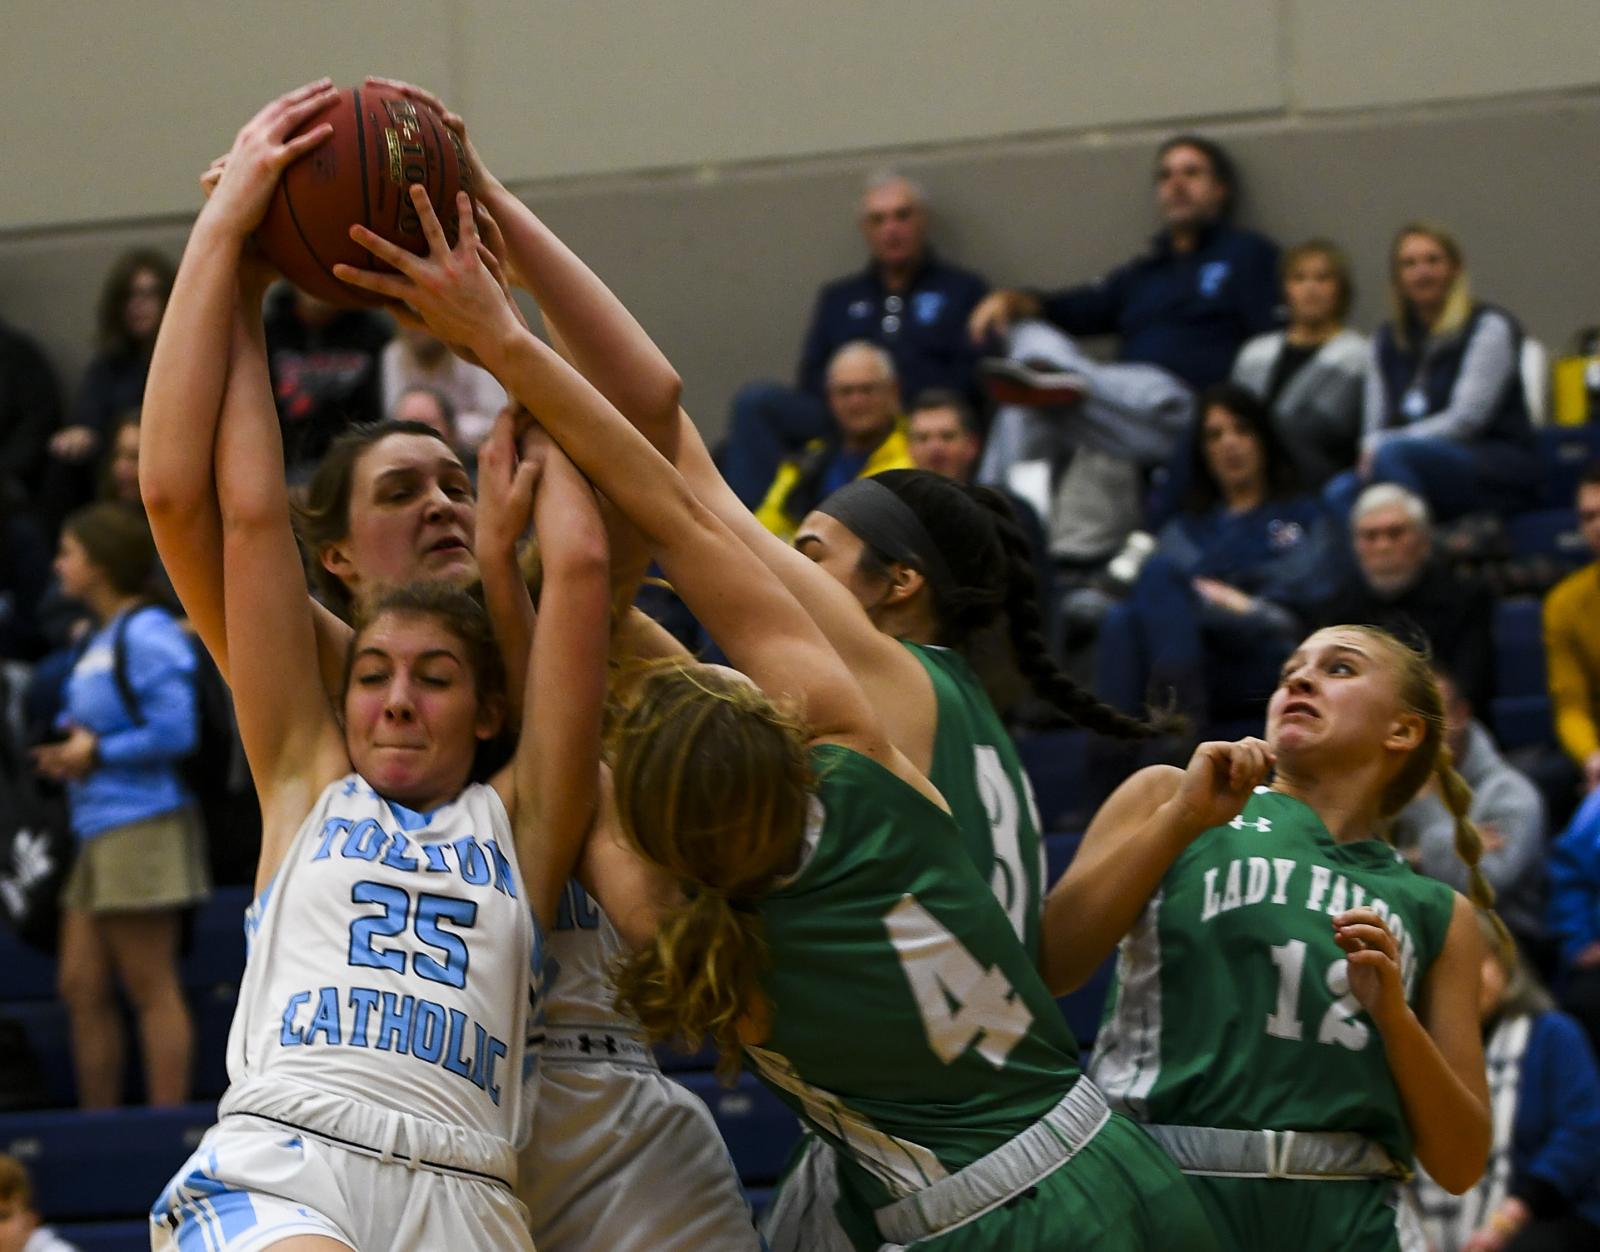 Tolton junior Lizzy Wright attempts to keep the ball from Blair Oaks High School players on Thursday, Feb. 6, 2020 at Tolton High School. Wright ended up losing the ball and falling to the ground.